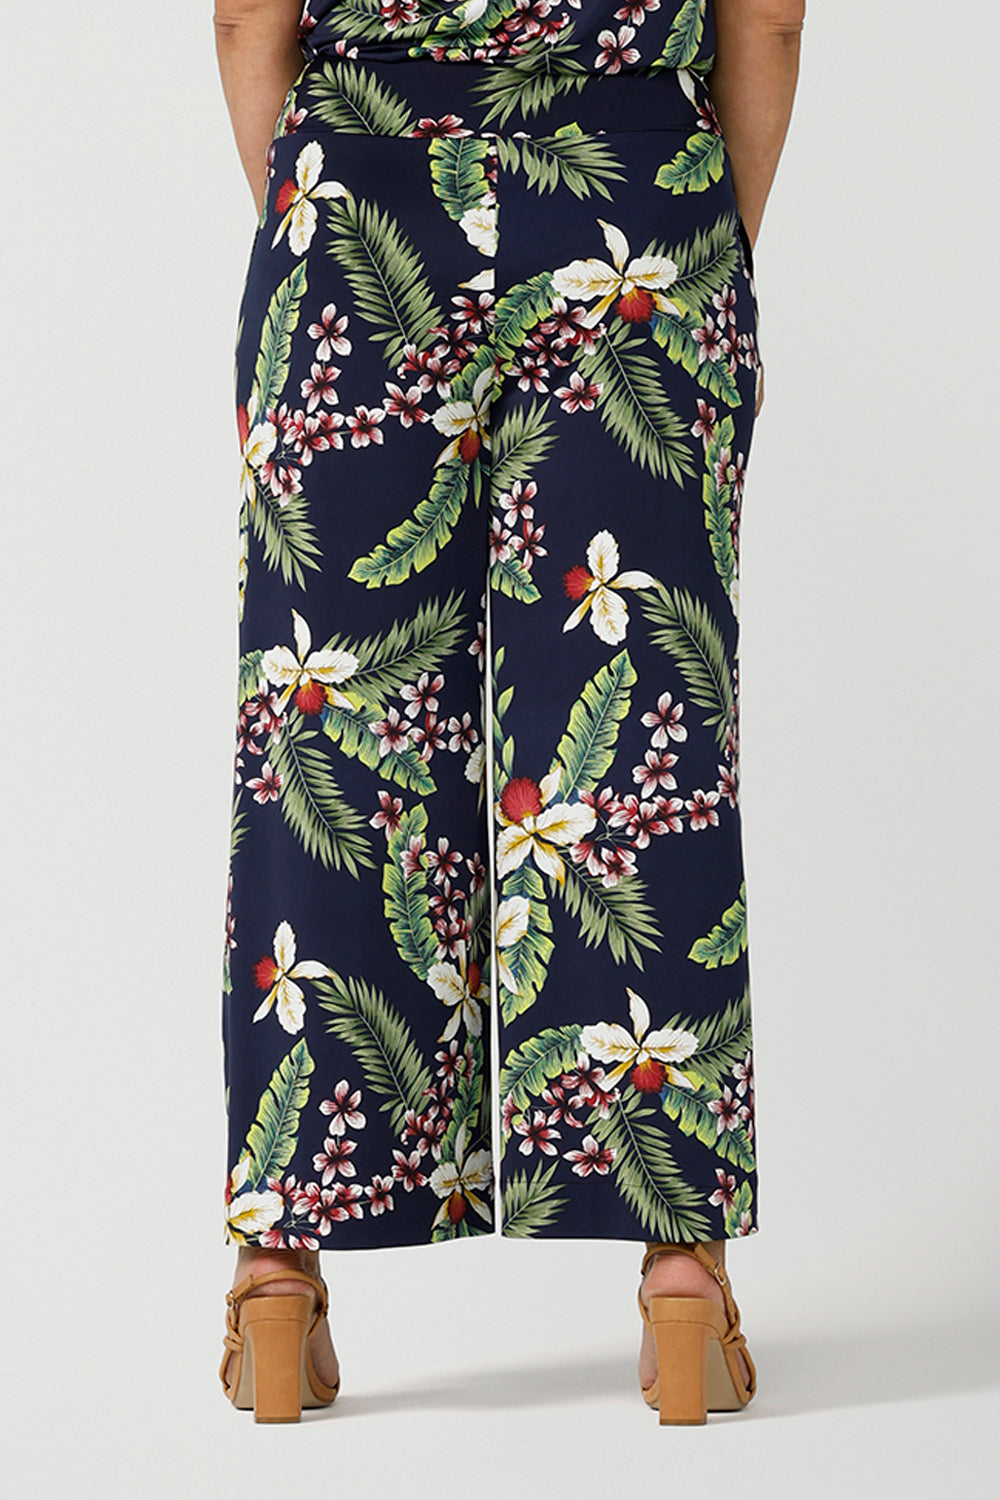 Back view close up of a size 12 woman wears wide leg Dany culotte in Merriment print. The perfect Christmas pant to wear for the festive season. Made in Australia for sizes 8 - 24.